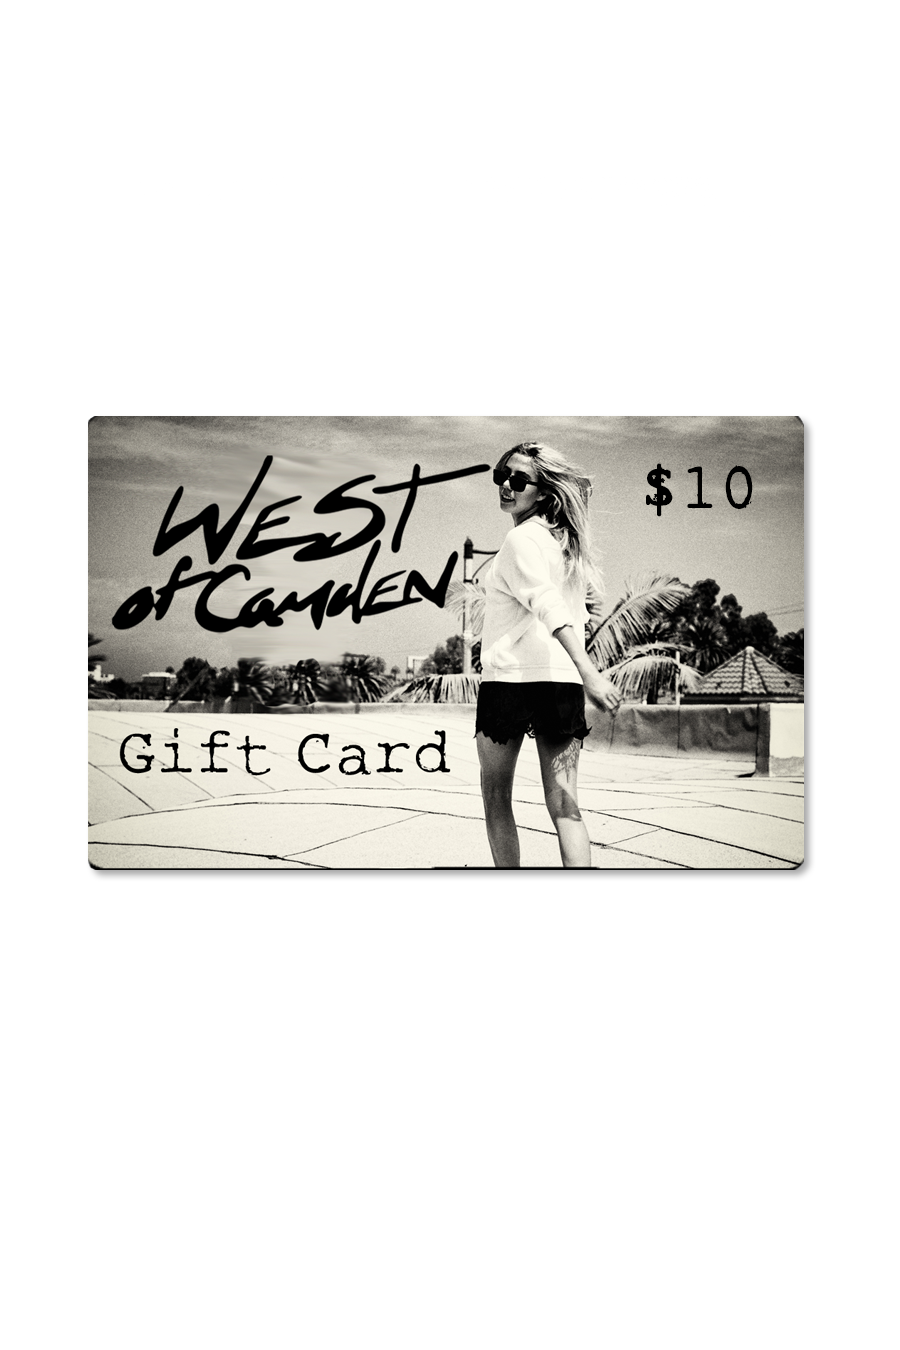 Gift Card - West of Camden - Main Image Number 2 of 5